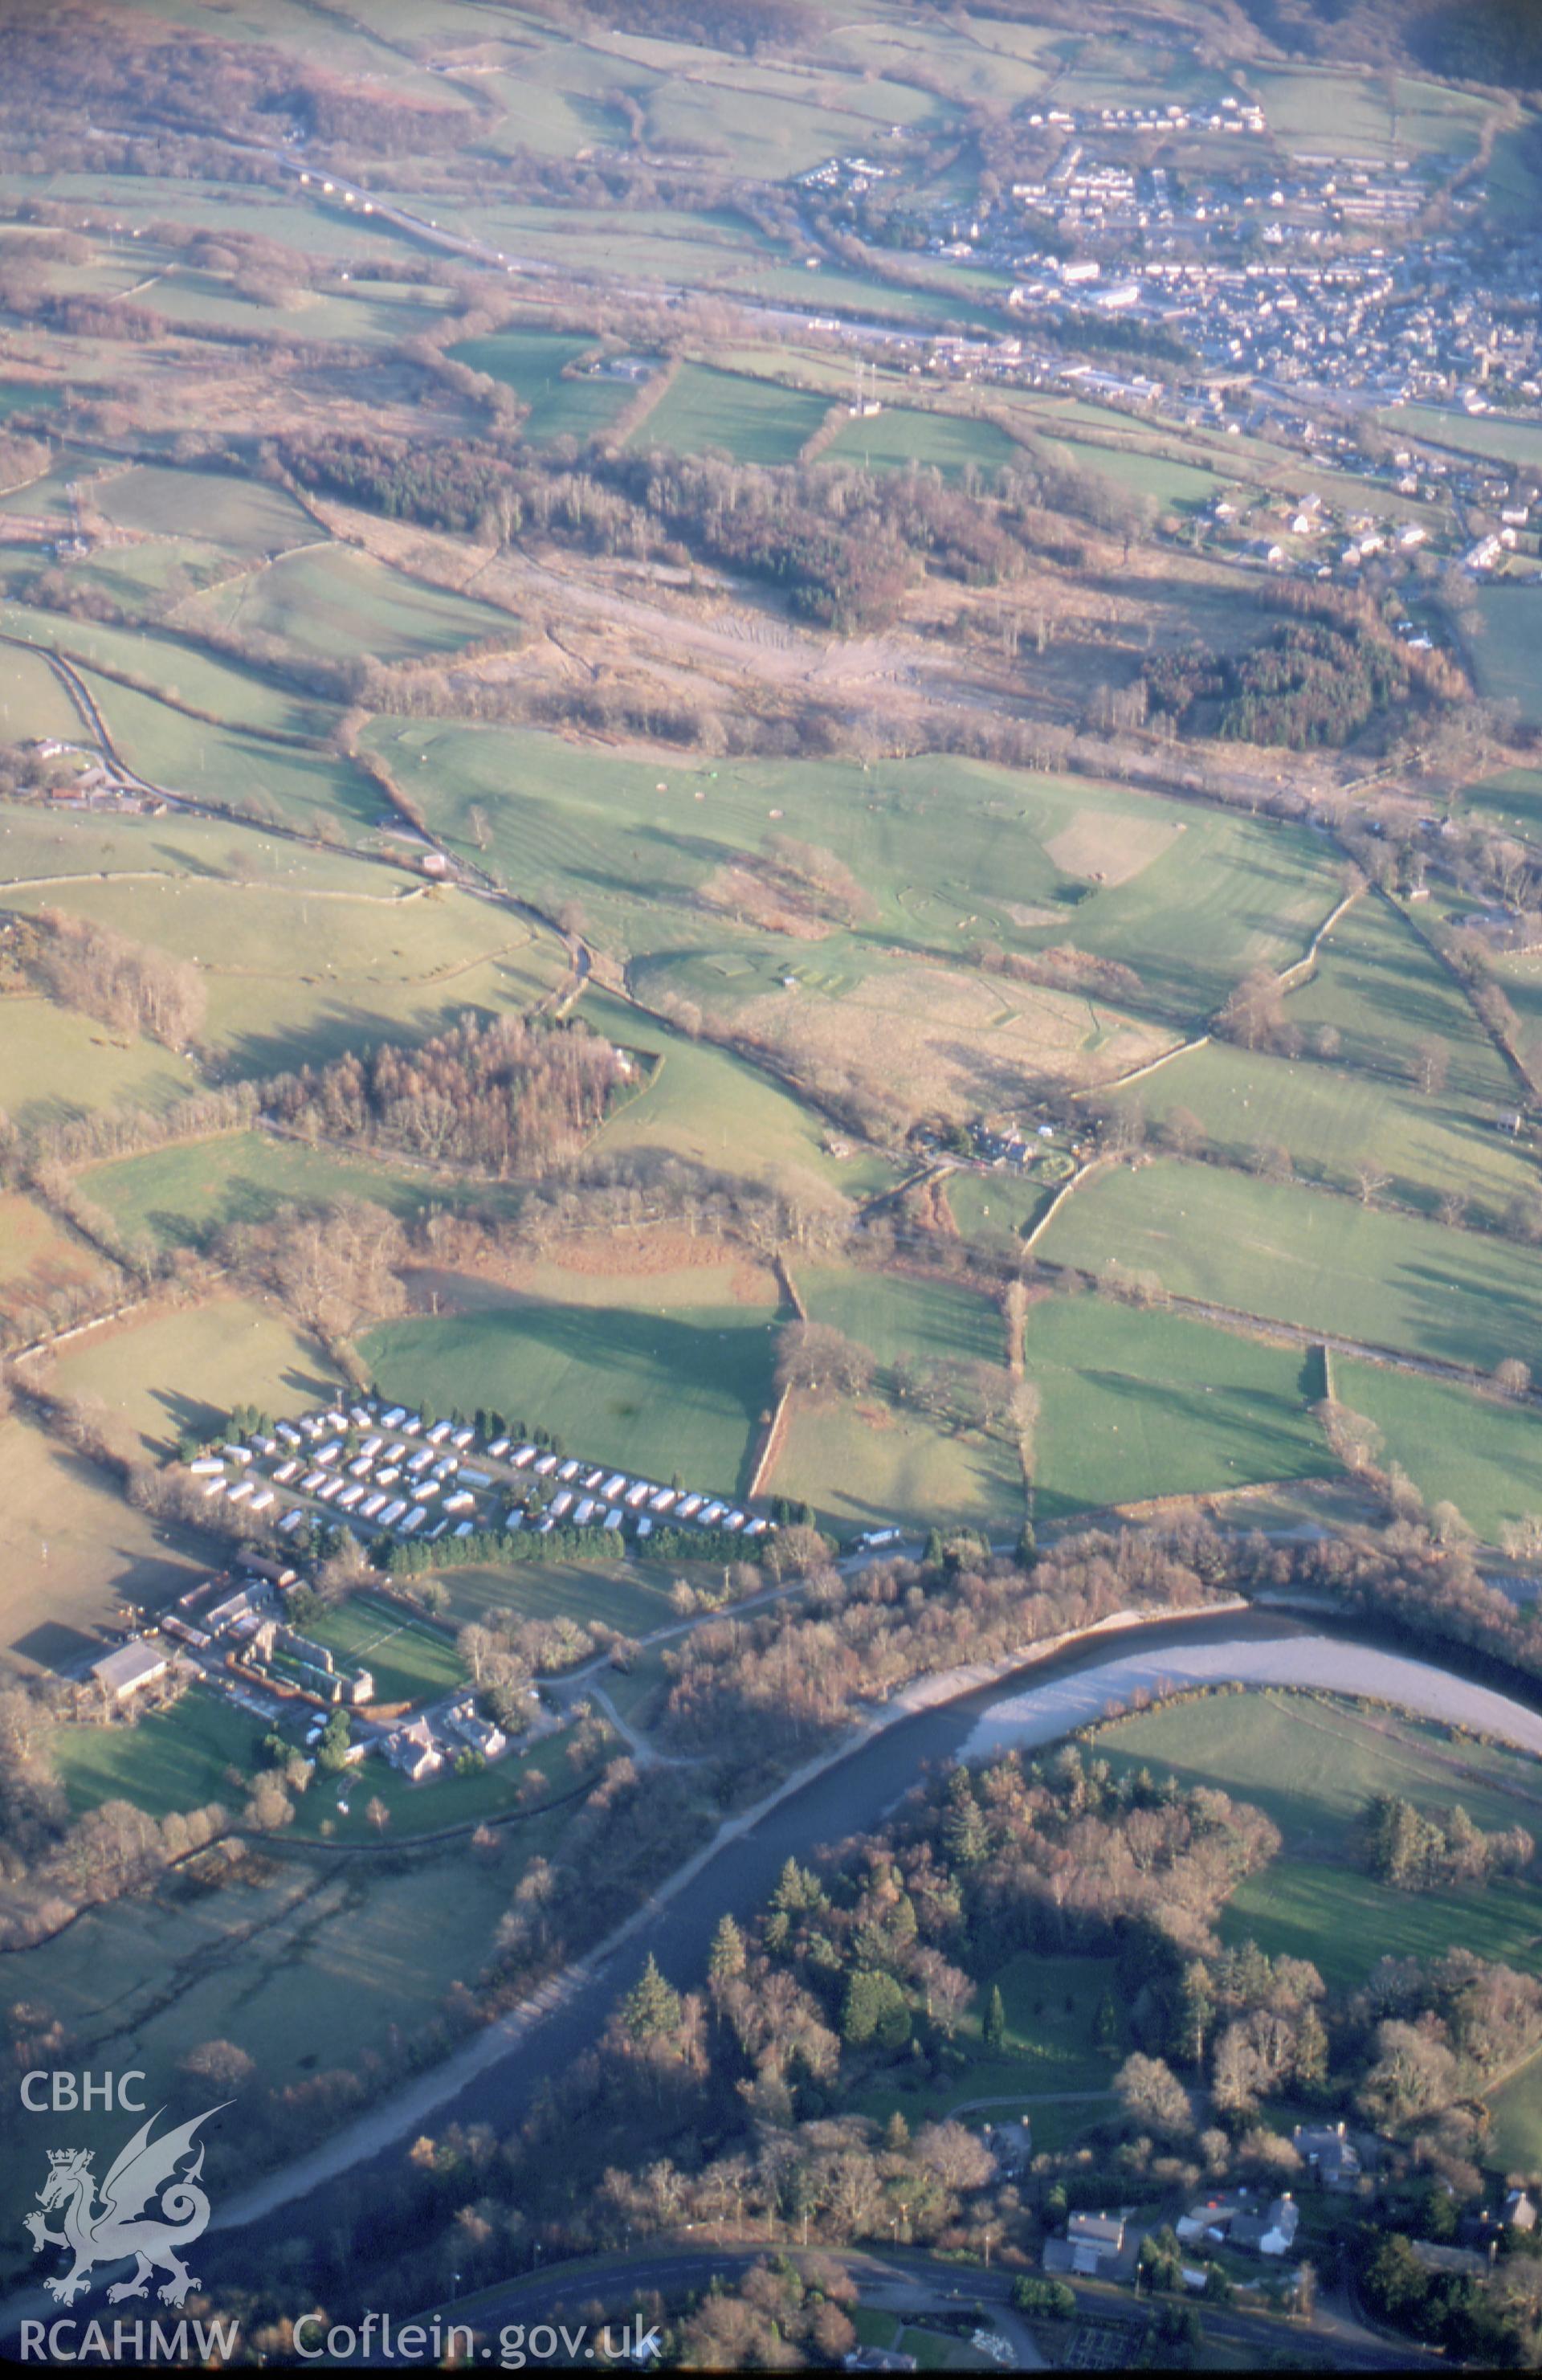 RCAHMW colour slide oblique aerial photograph of Cymer Abbey, Llanelltyd, taken on 17/03/1999 by Toby Driver